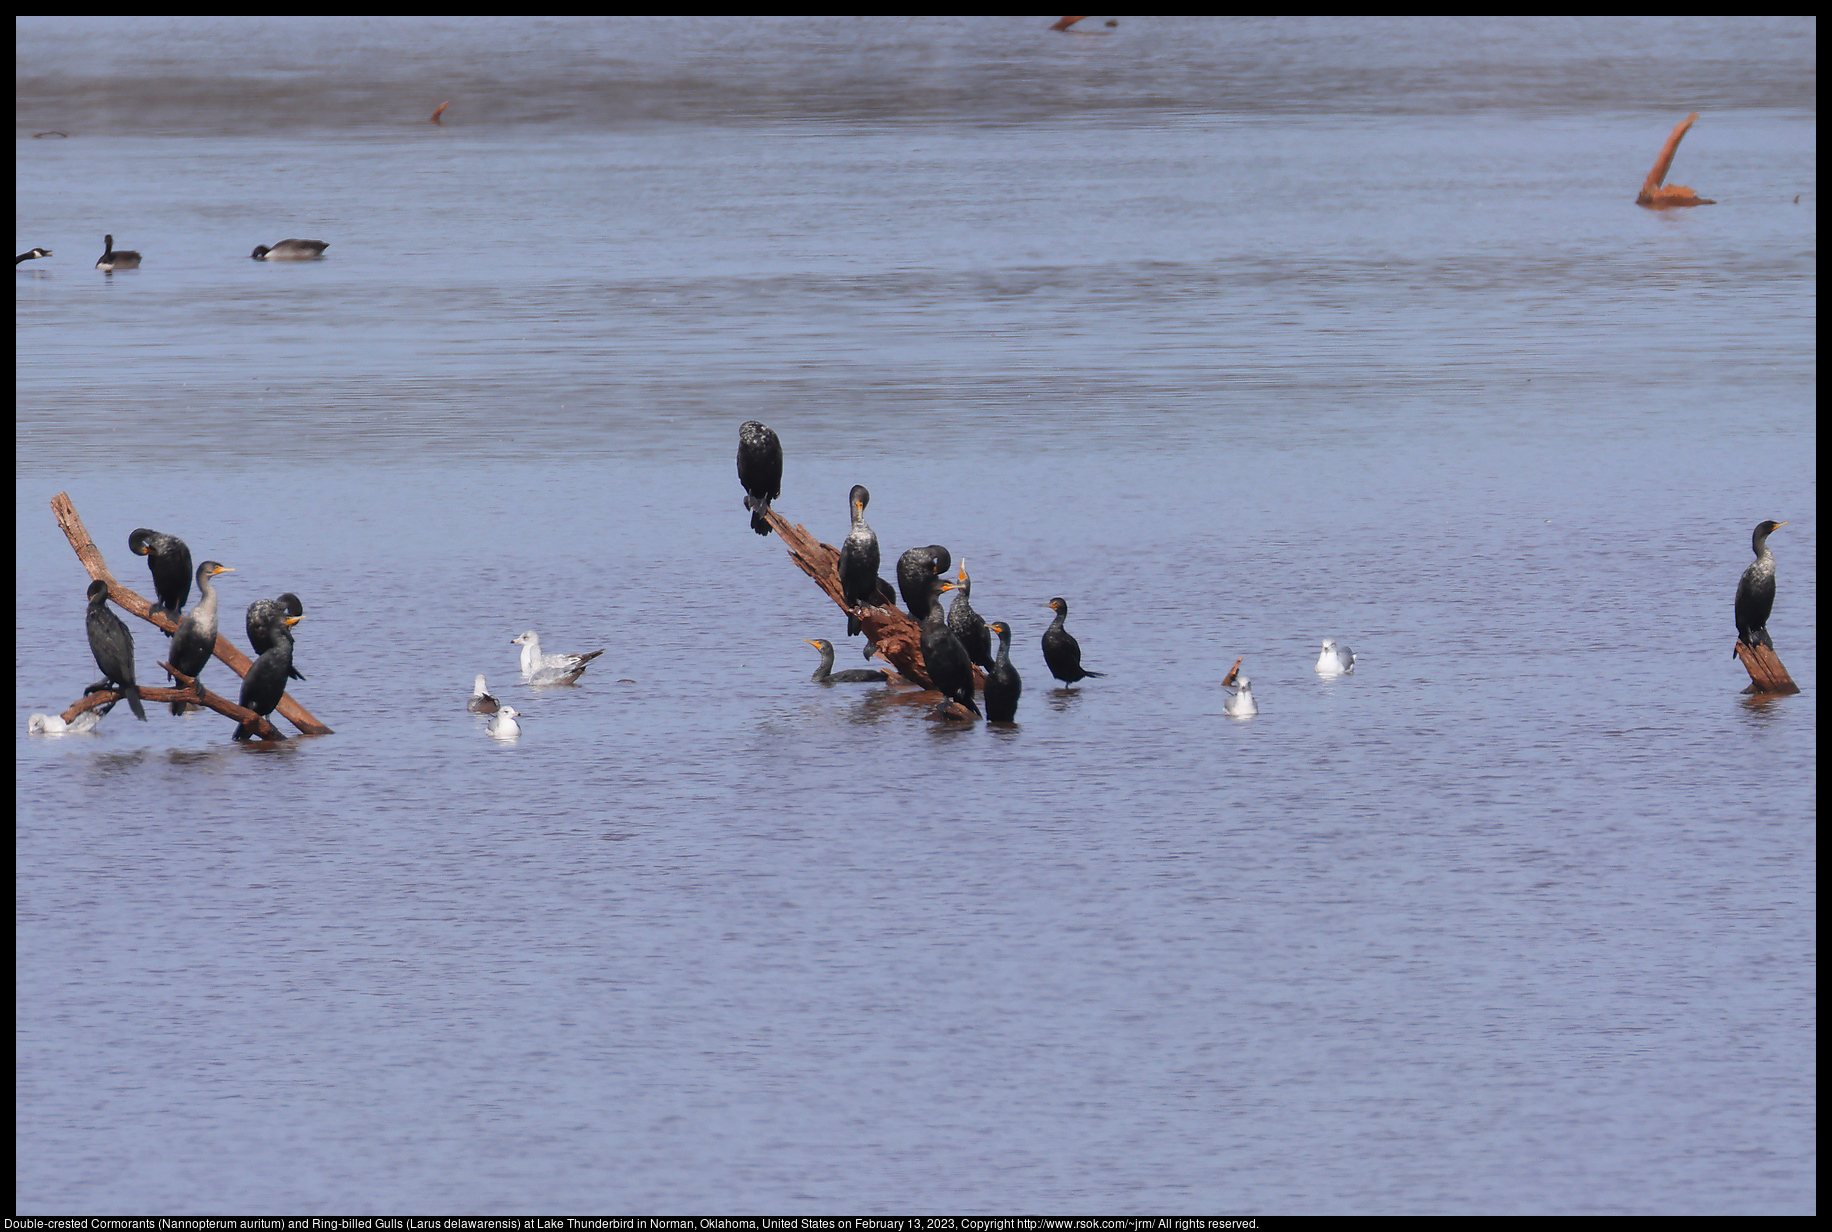 Double-crested Cormorants (Nannopterum auritum) and Ring-billed Gulls (Larus delawarensis) at Lake Thunderbird in Norman, Oklahoma, United States on February 13, 2023